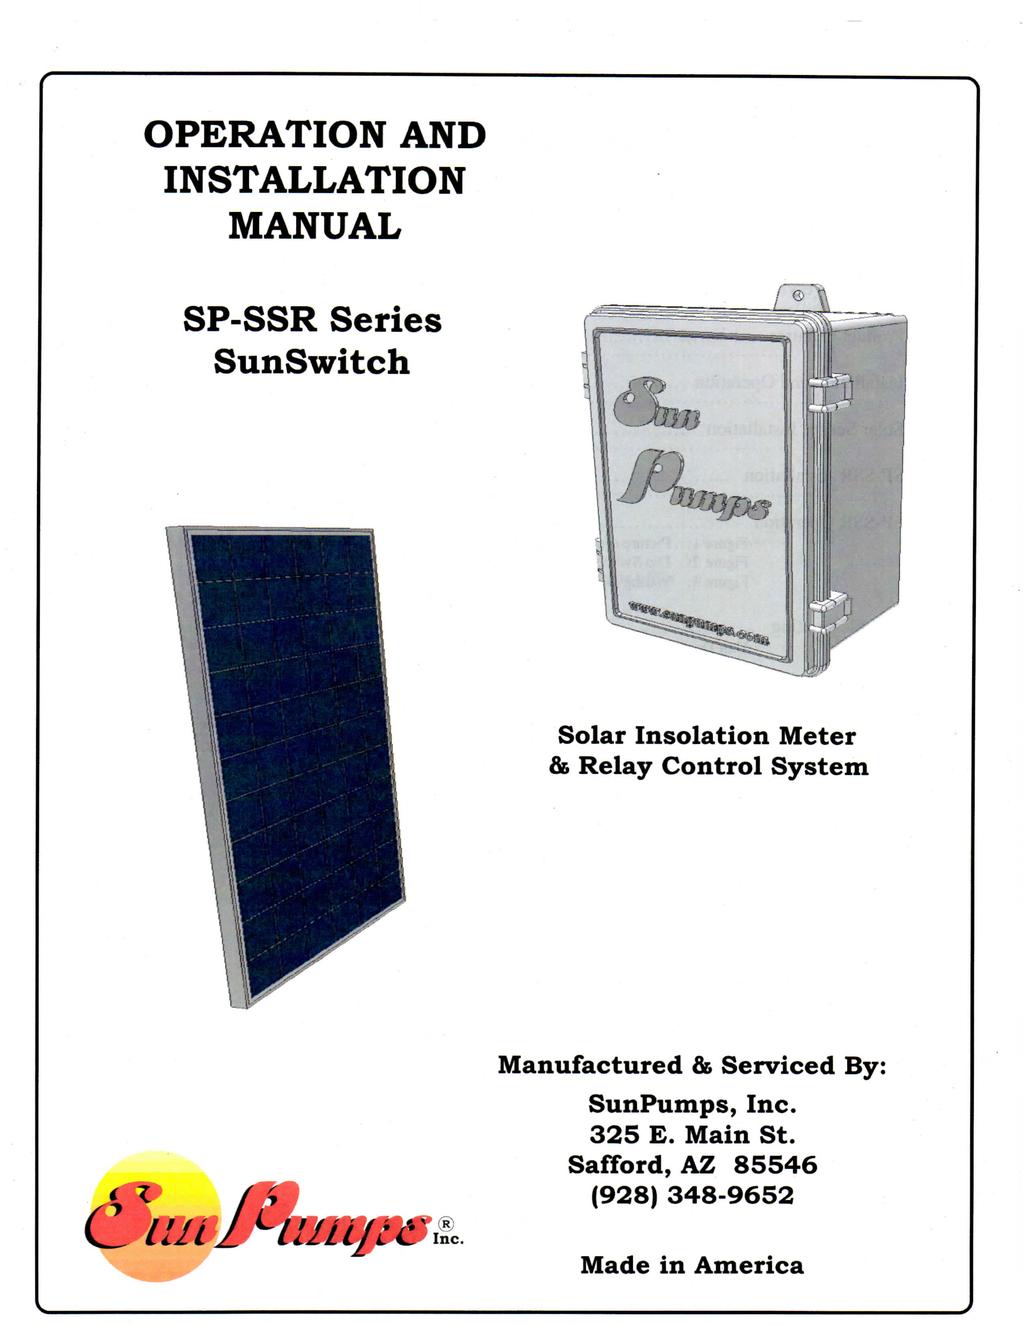 OPERATION AND INSTALLATION MANUAL Manufactured & Serviced By: SunPumps,